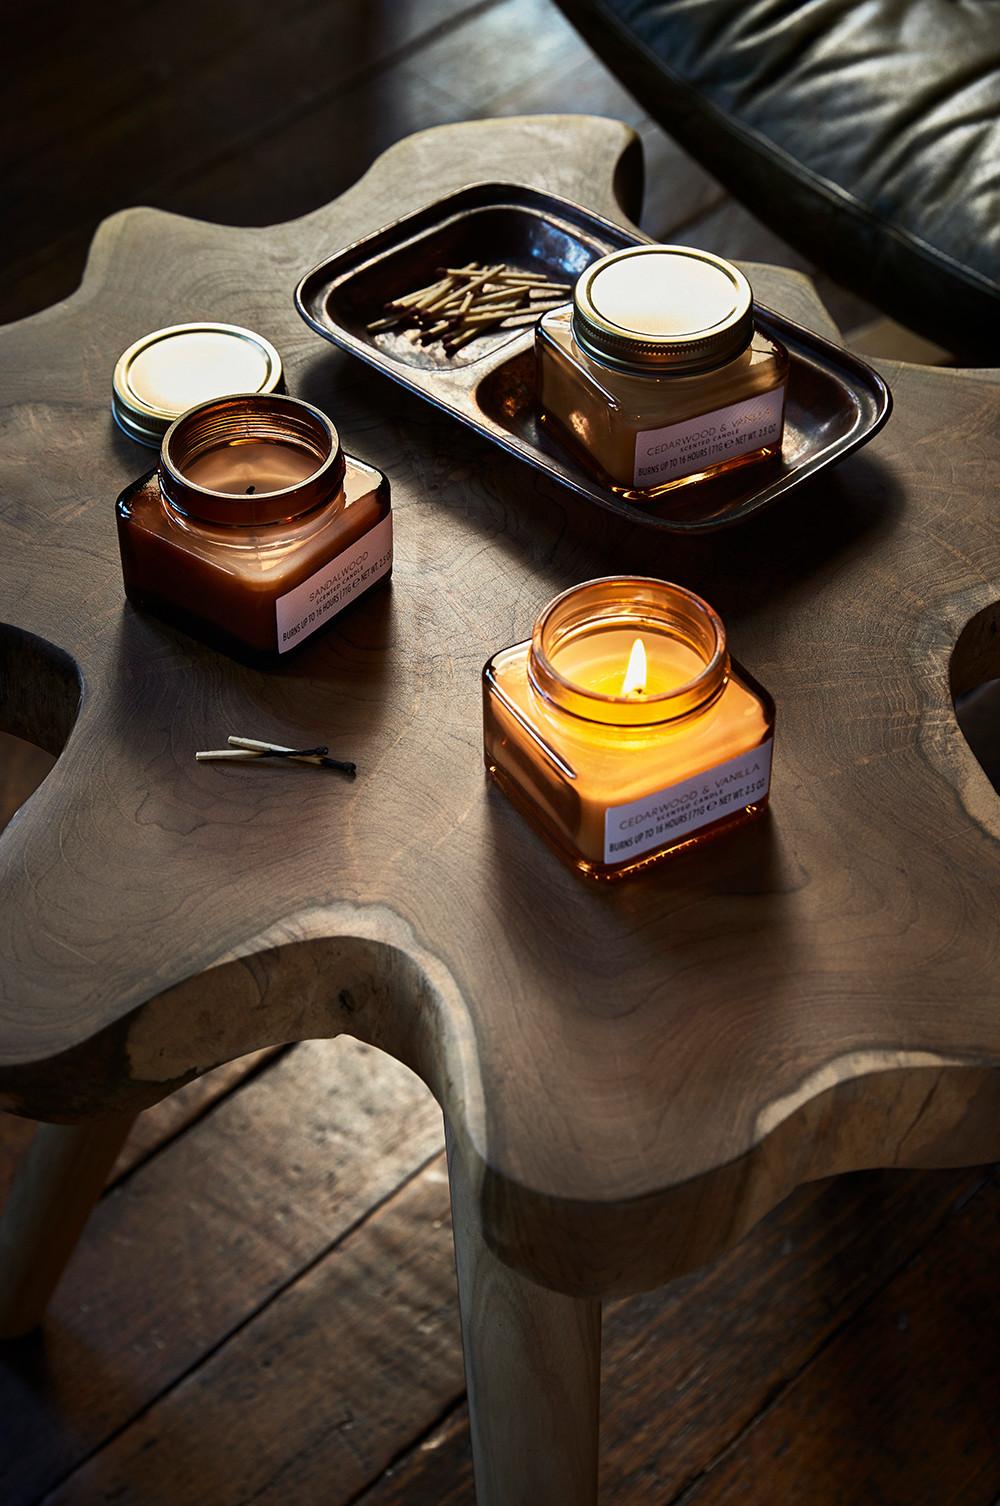 Interiors image with jar candles